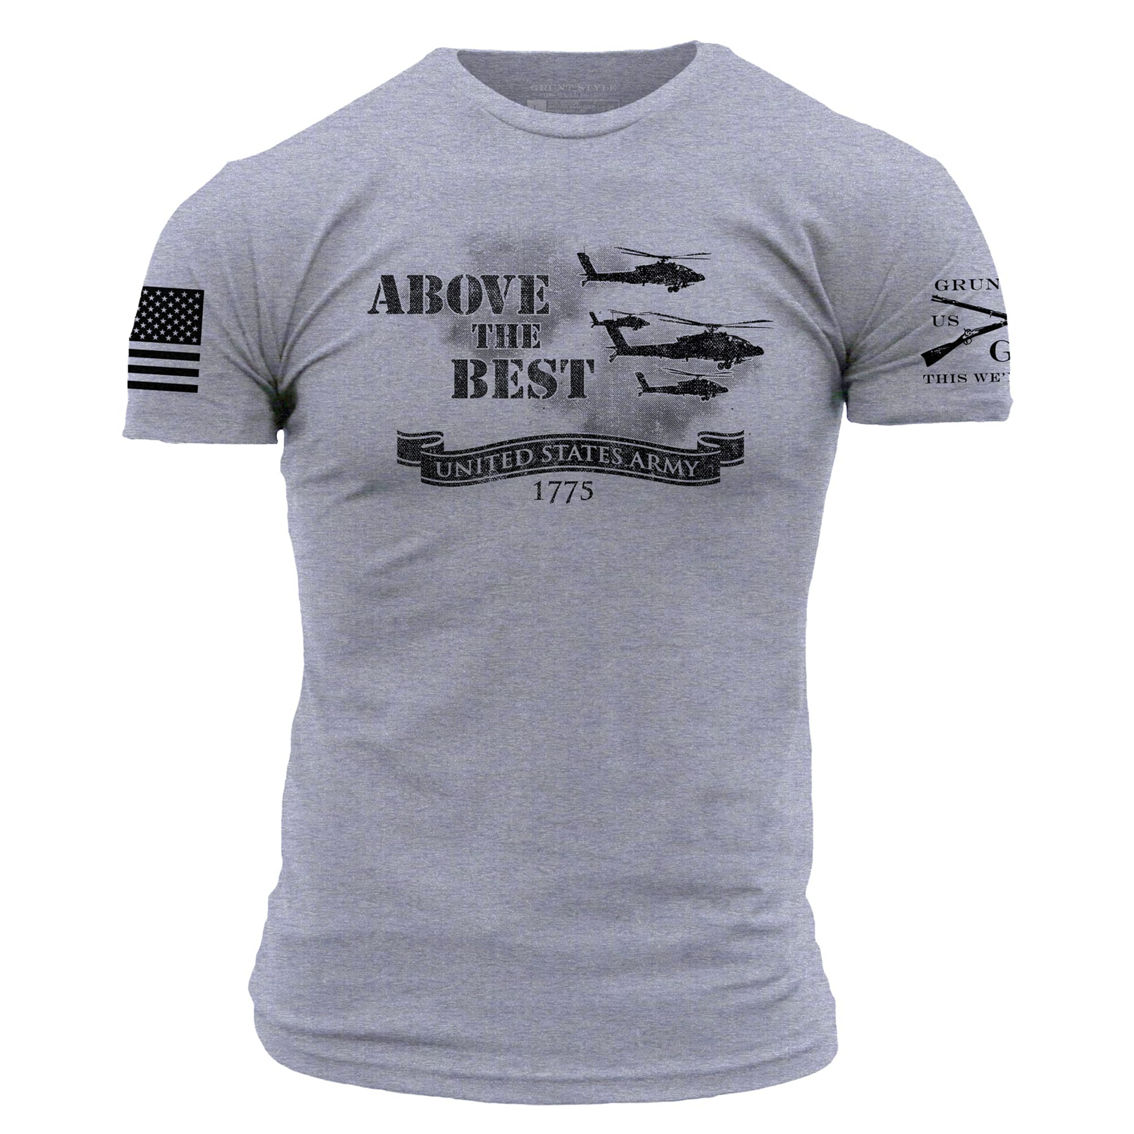 Grunt Style Men's Army Above The Best T-Shirt - Heather Gray - Image 2 of 2